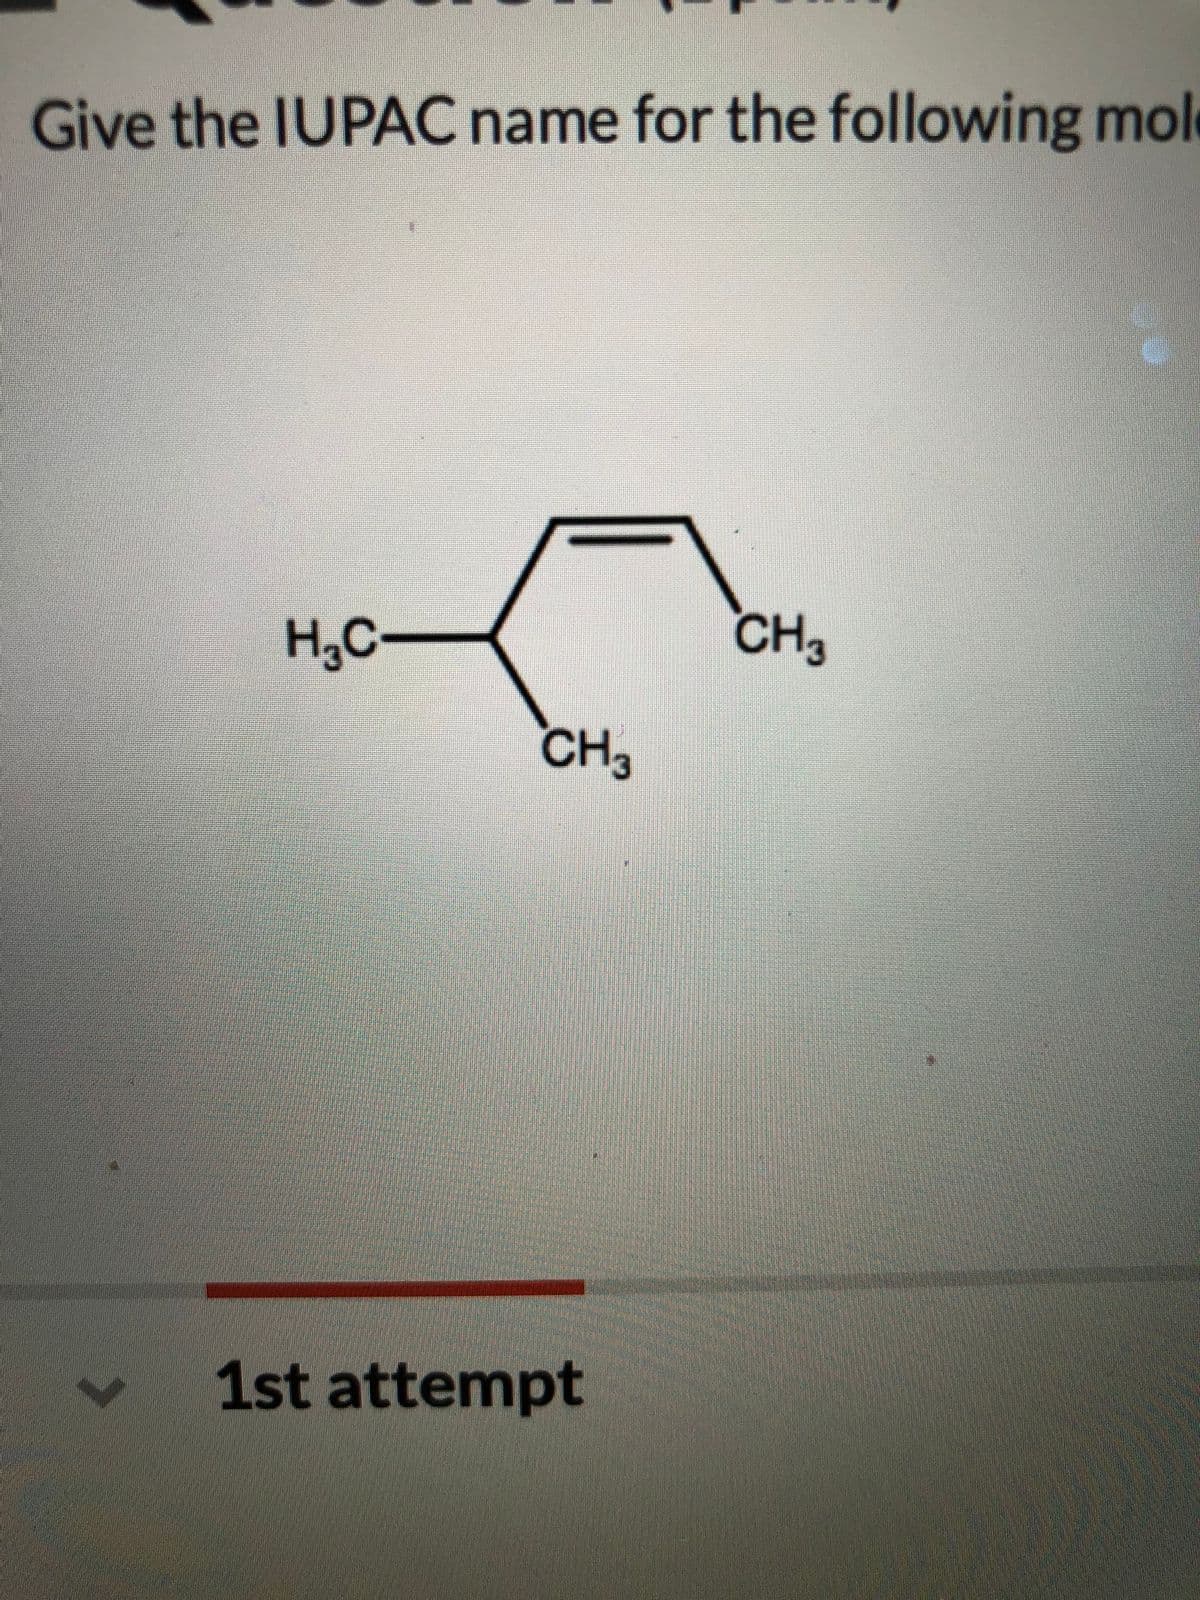 Give the IUPAC name for the following mol
H,C
CH3
CH3
1st attempt
